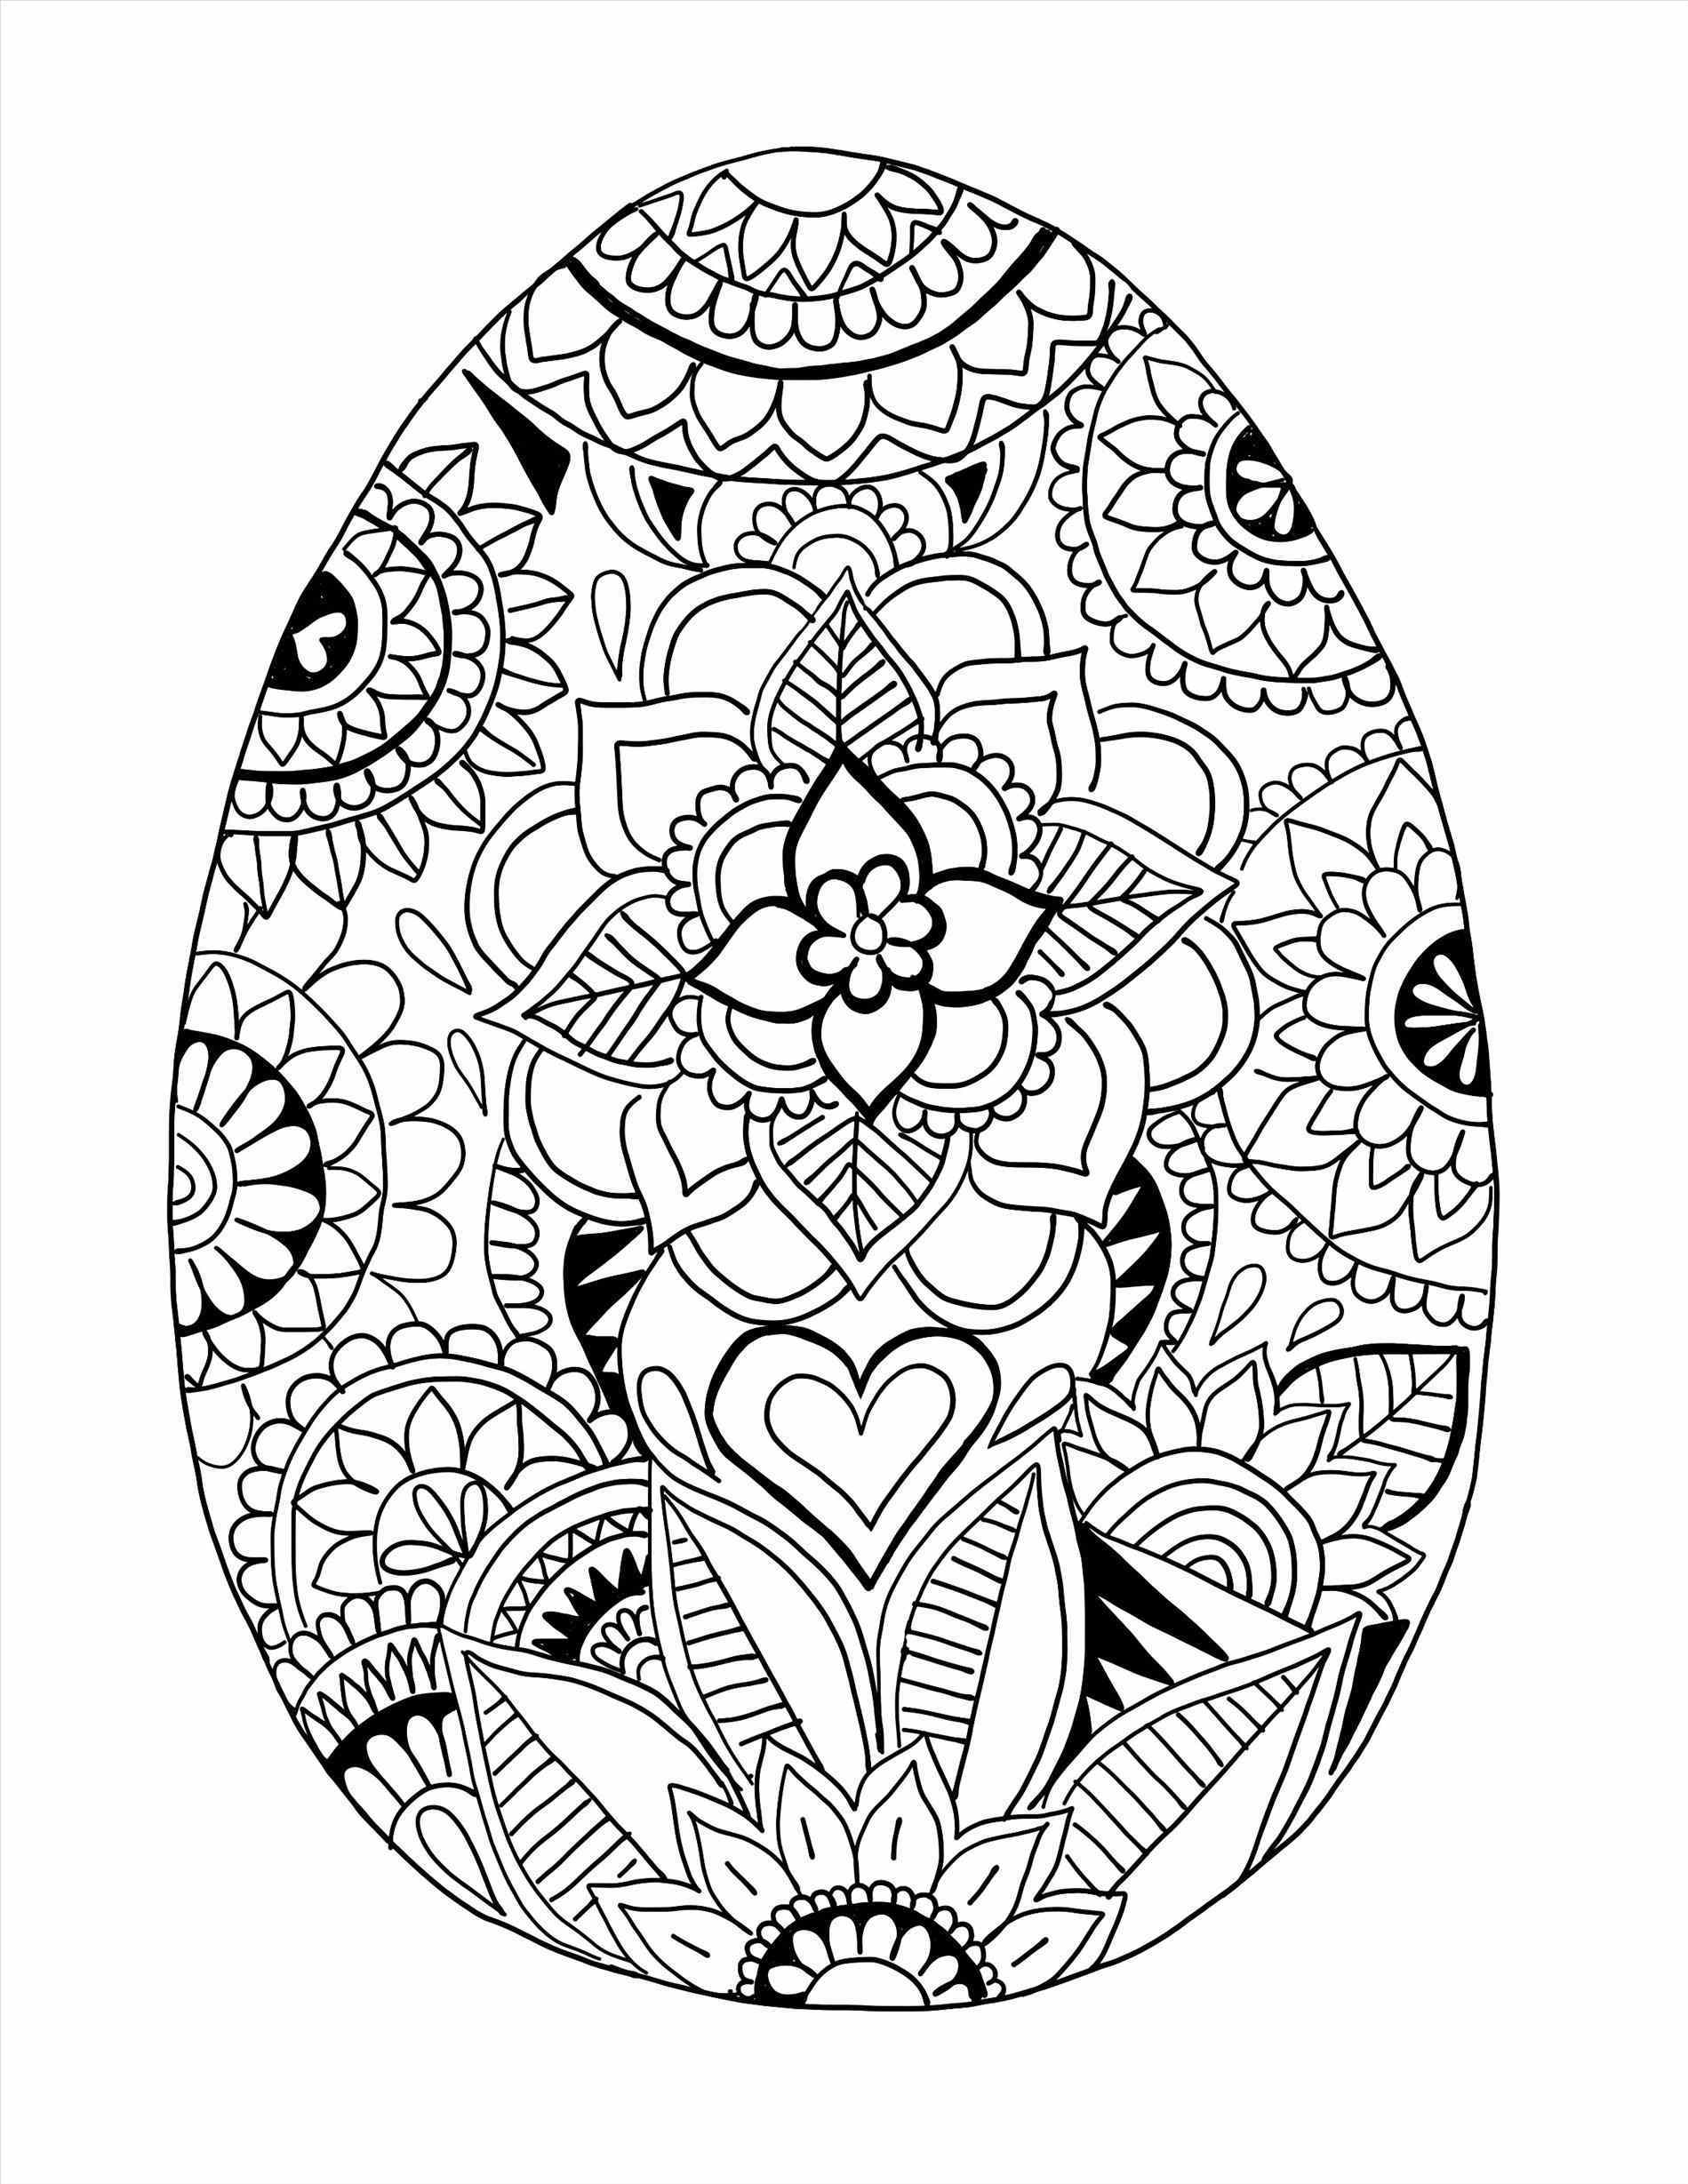 Detailed Easter Egg Coloring Pages At GetColorings Free Printable Colorings Pages To Print